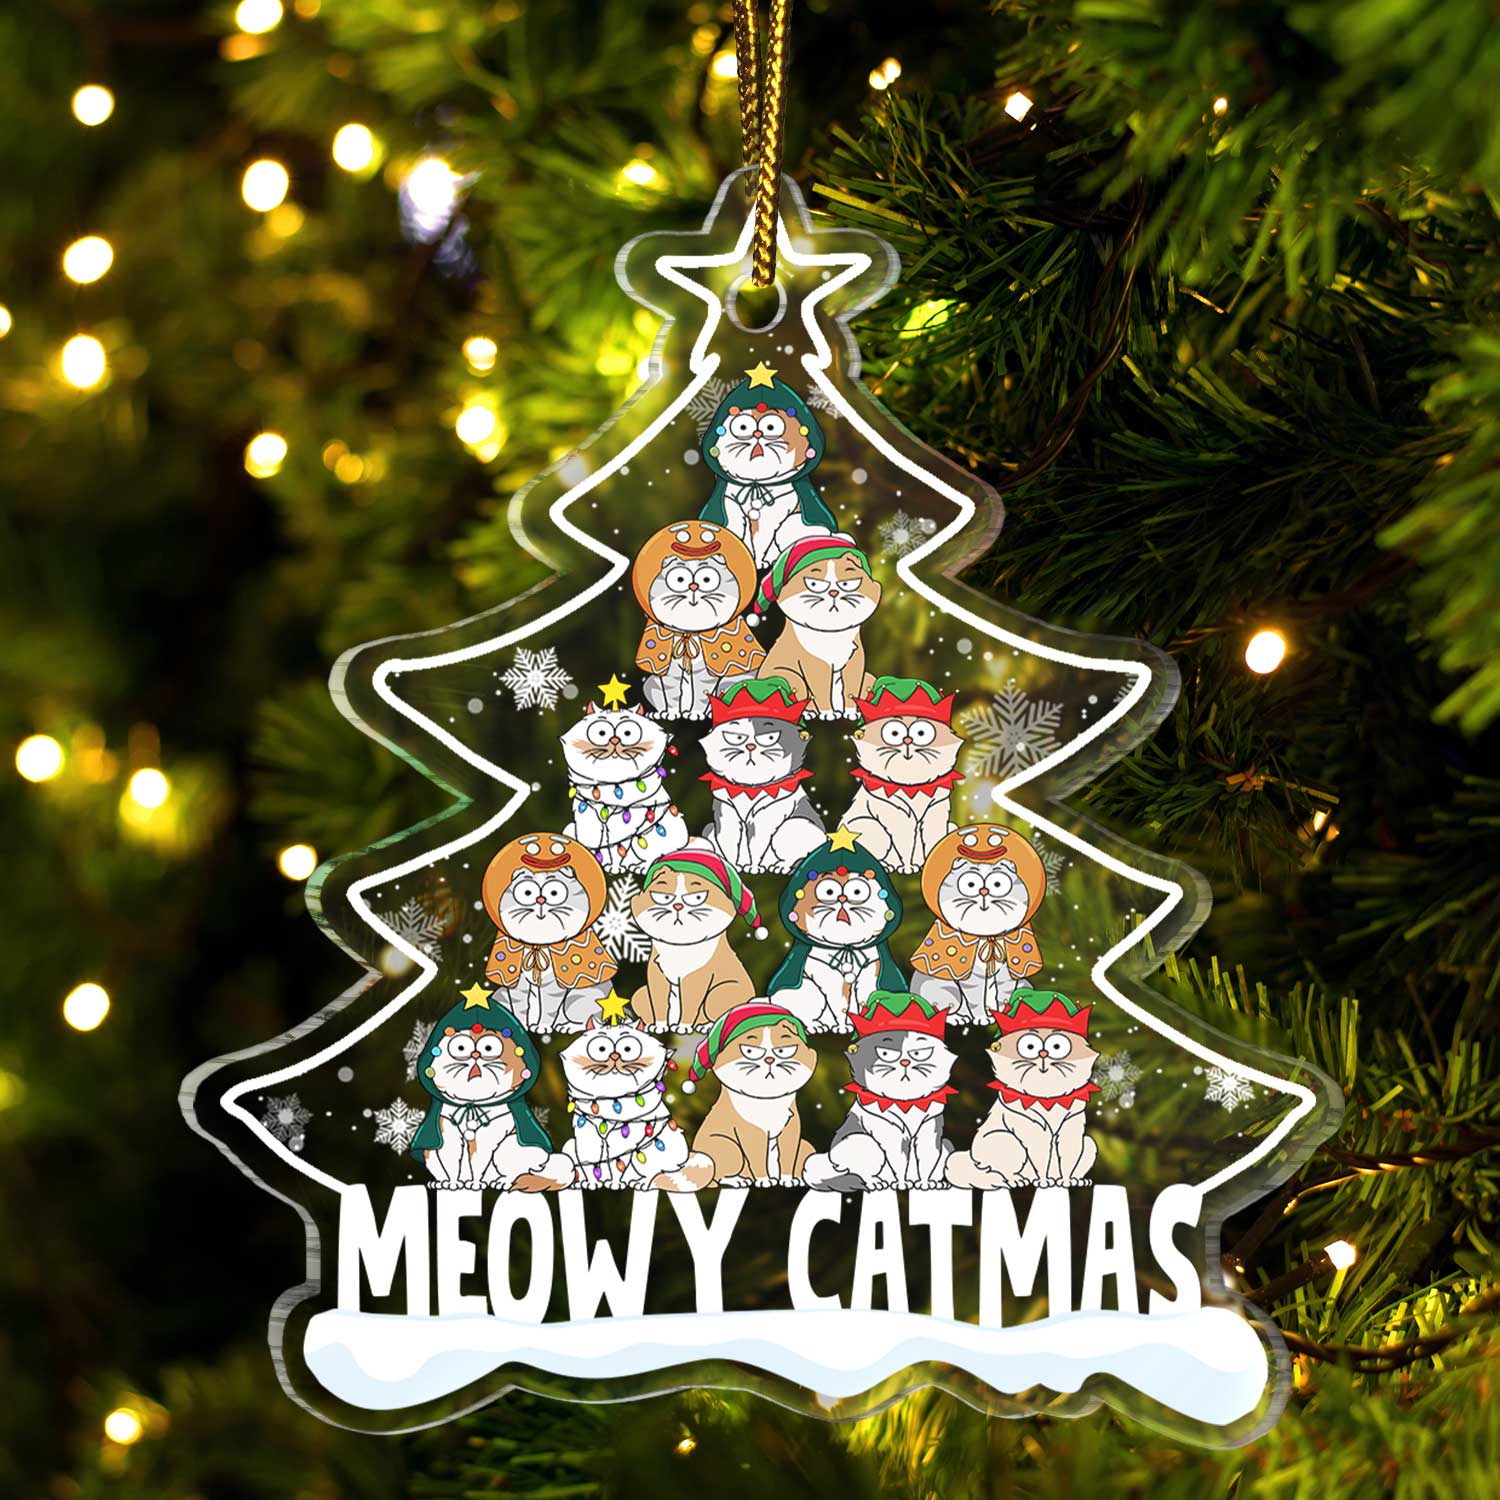 Meowy Catmas Cartoon Style - Christmas Gift For Cat Lovers - Personalized Custom Shaped Acrylic Ornament